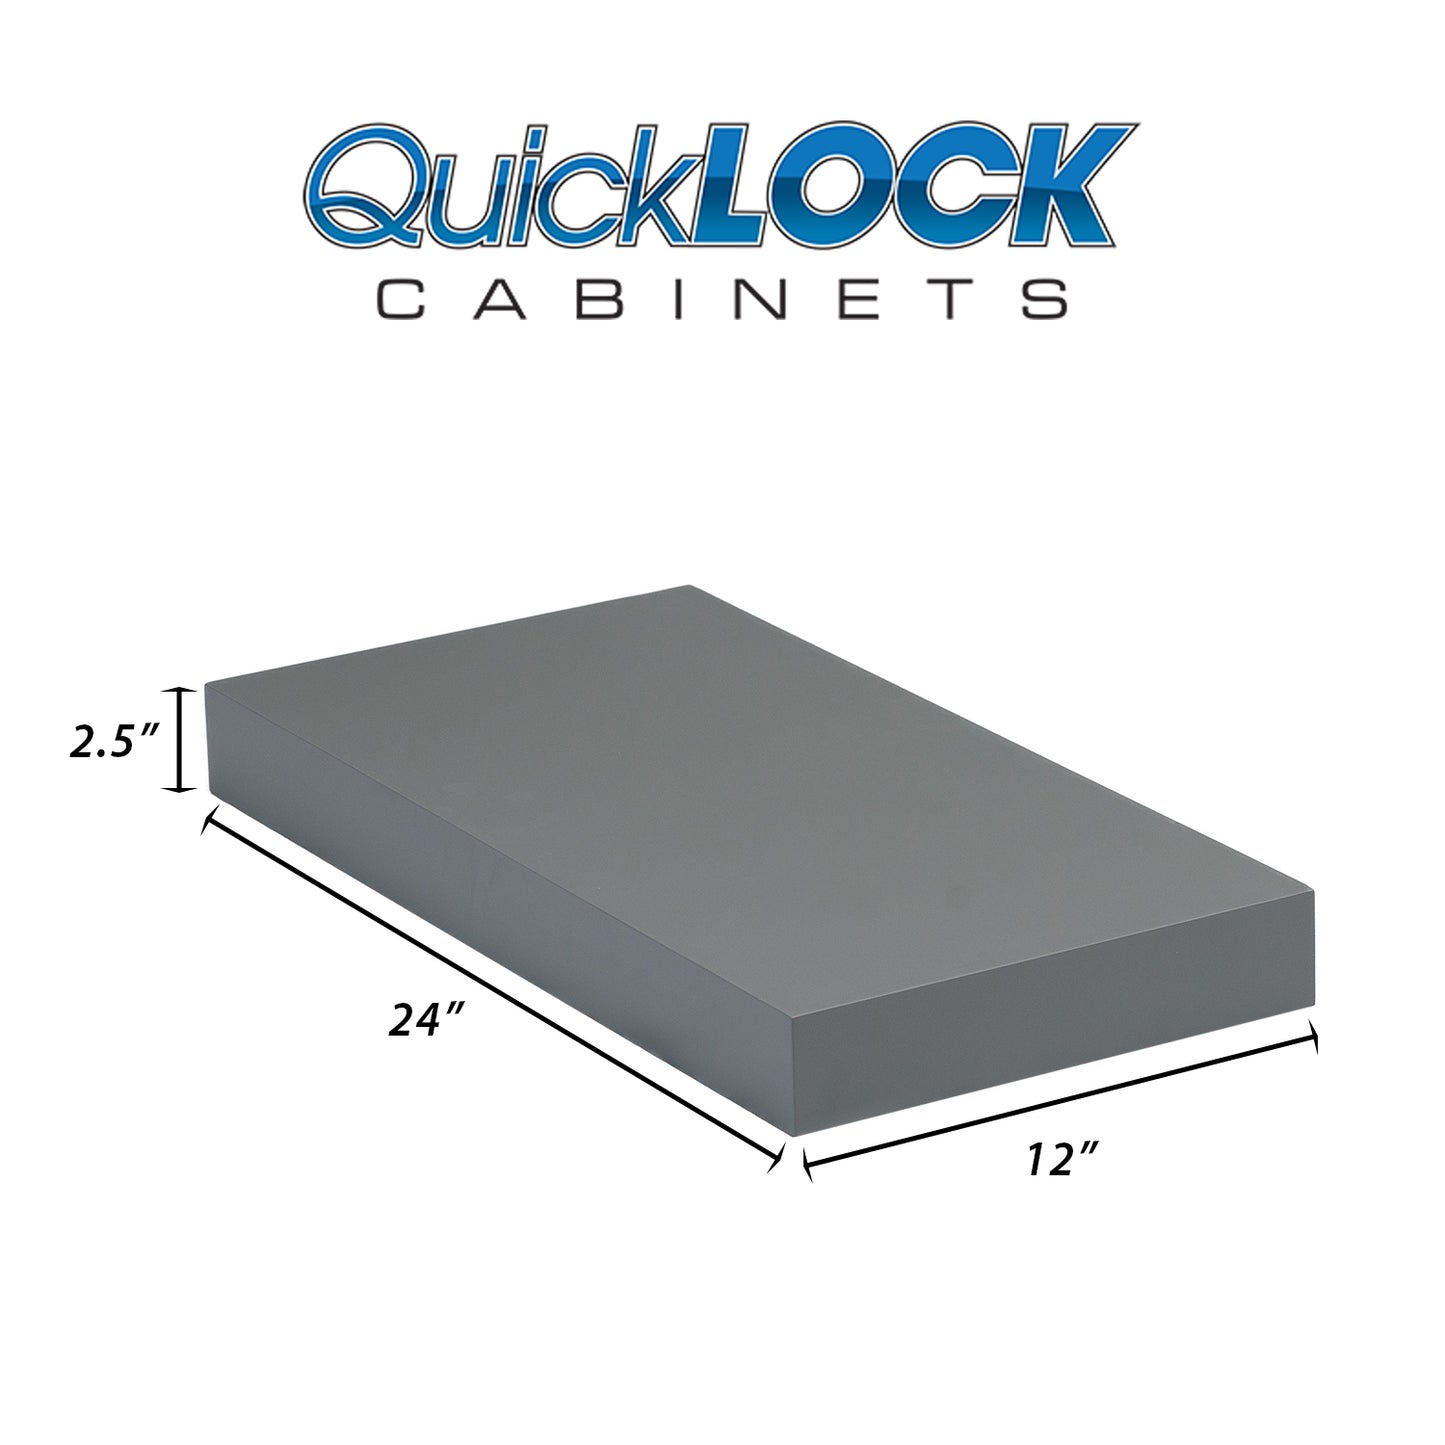 Quicklock Cabinets Floating Shelves | 2.5" Thick | Magnetic Gray, 12" D x 24" W x 2.5" H | American Made | Hardwood Bracket | Complete Shelf Unit